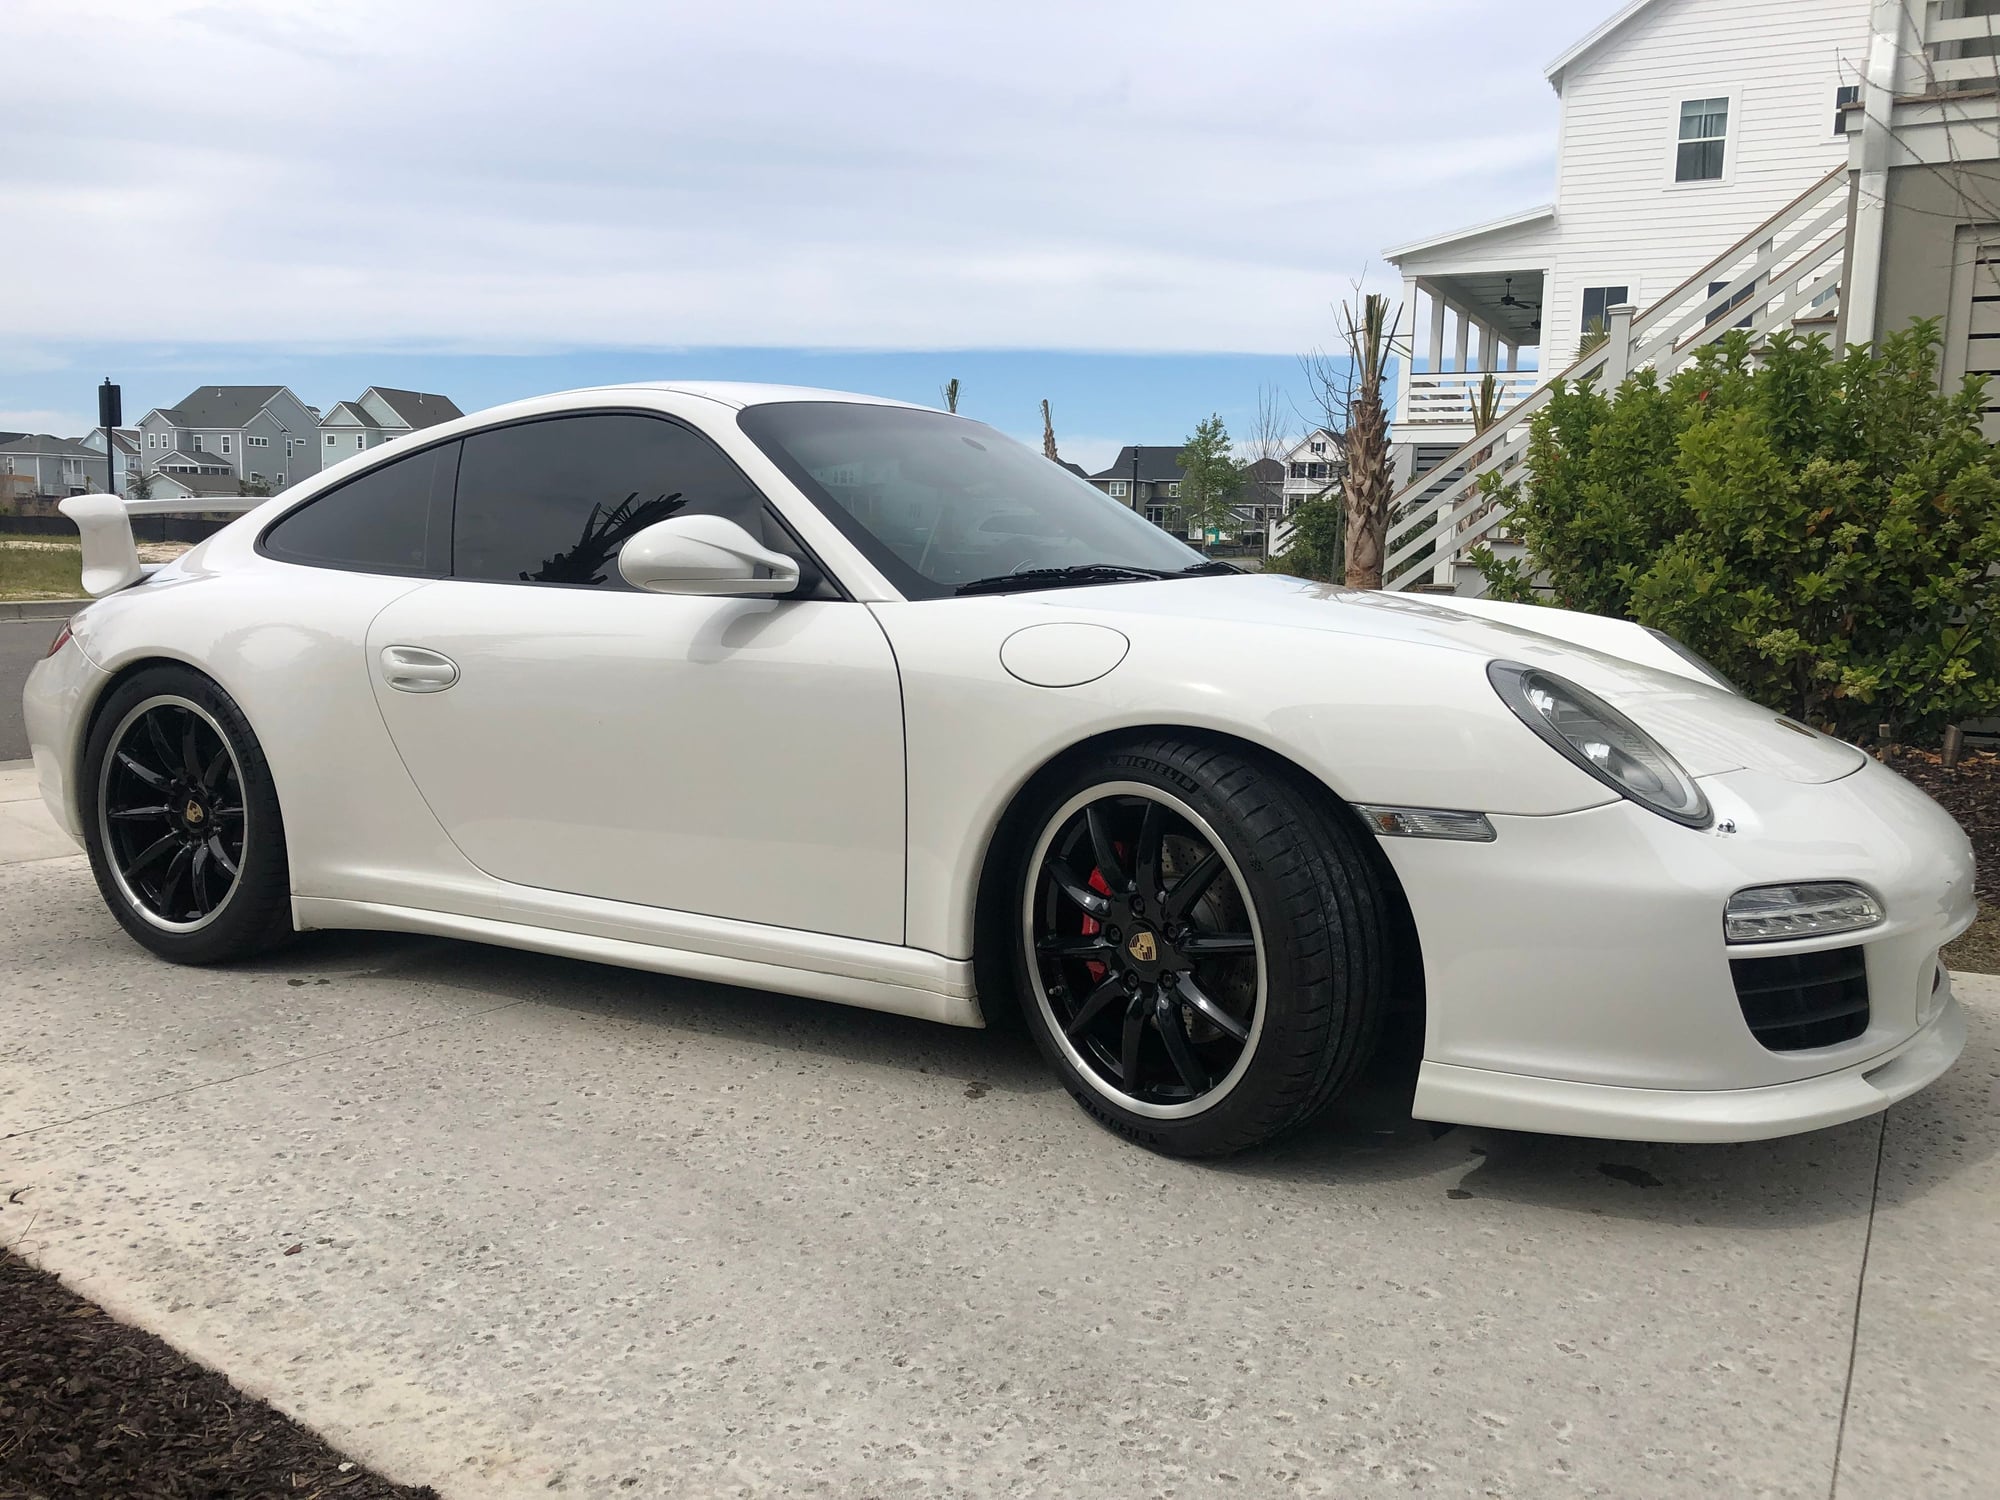 2011 Porsche 911 - 2011 911 GTS Coupe PDK white/blk - Used - VIN WP0AB2A99BS720671 - 49,400 Miles - 6 cyl - 2WD - Automatic - Coupe - White - Daniel Island, SC 29492, United States